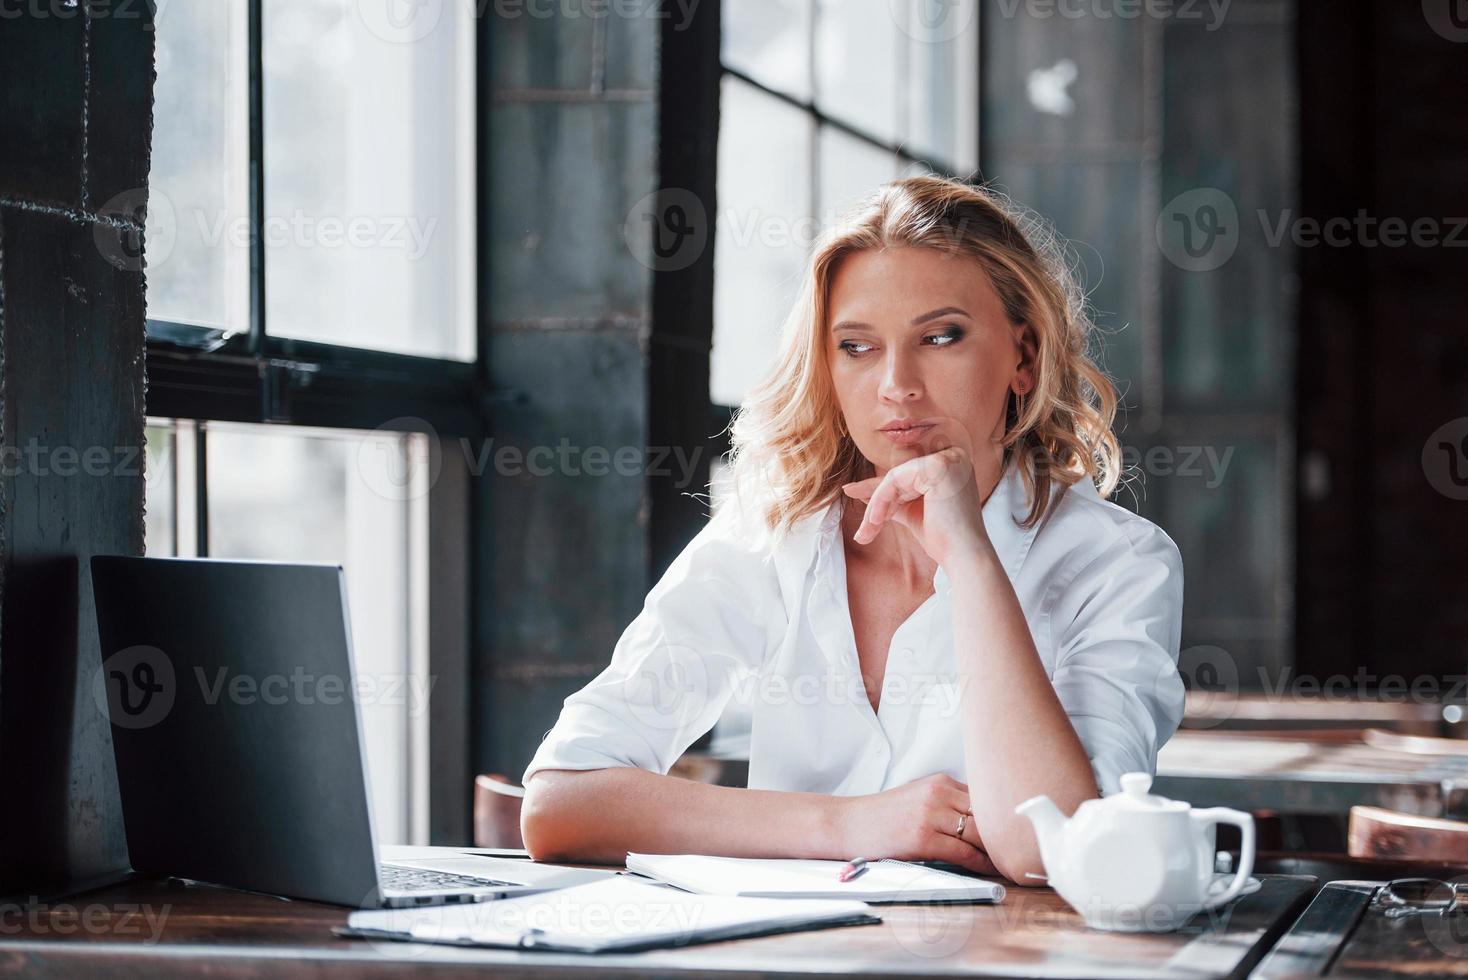 Waits when file will open. Businesswoman with curly blonde hair indoors in cafe at daytime photo